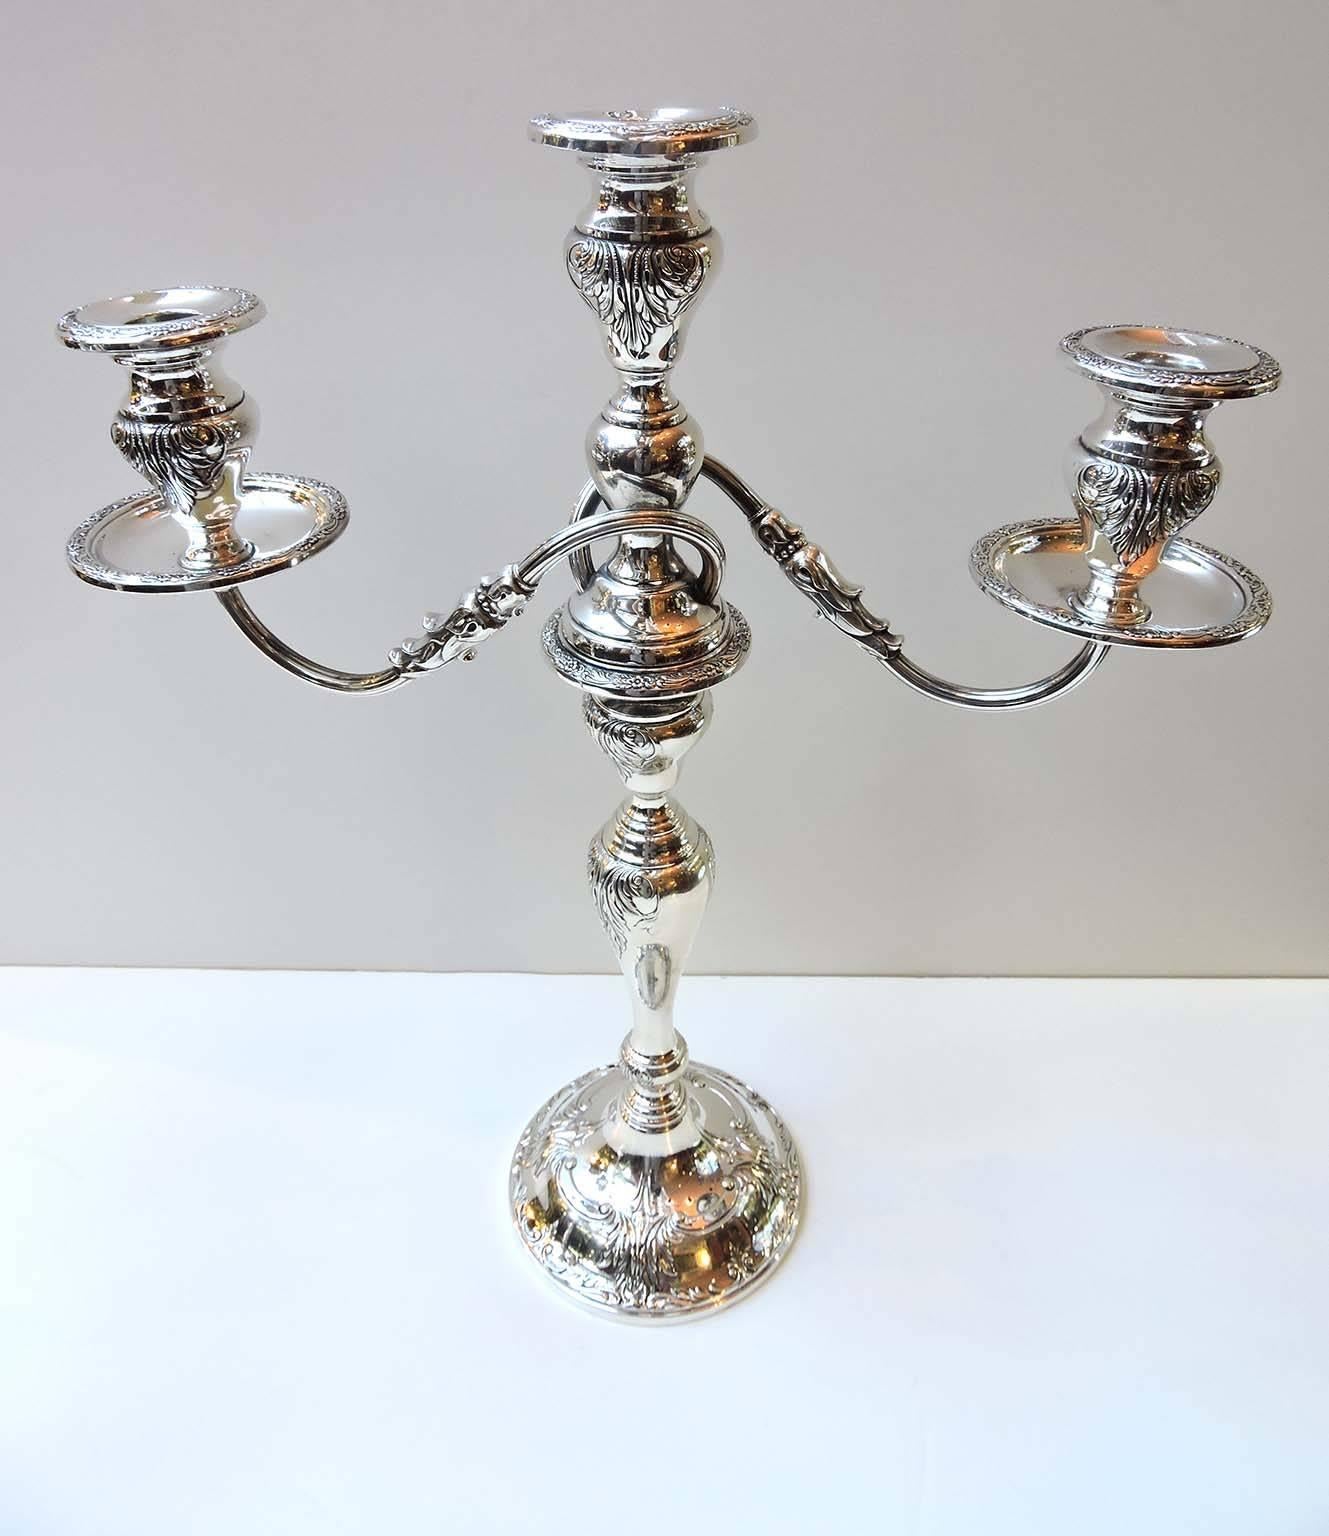 A large 17 inch pair of sterling silver candelabras by Frank M Whiting Company of Massachusetts. Each candelabra having three arms which are removable and become single candle holders. 

Marked on base of each Sterling with Whiting marks and 